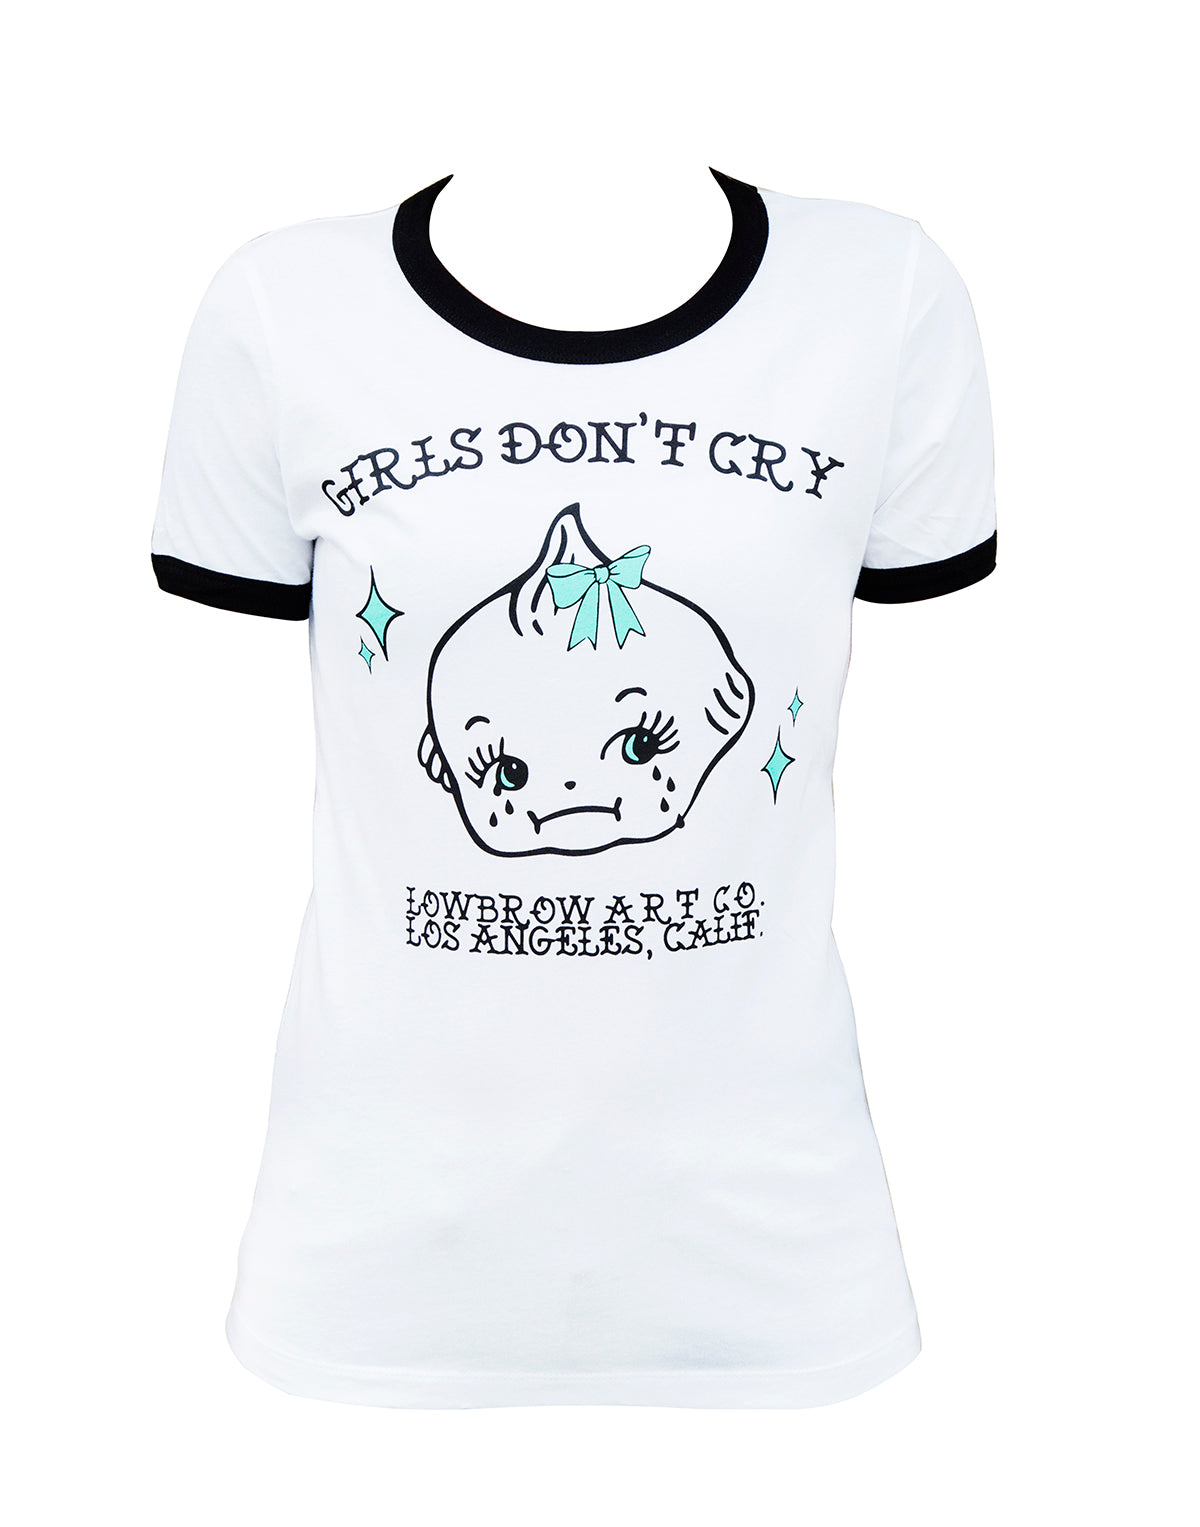 girls don't cry ringer tee 白赤　m